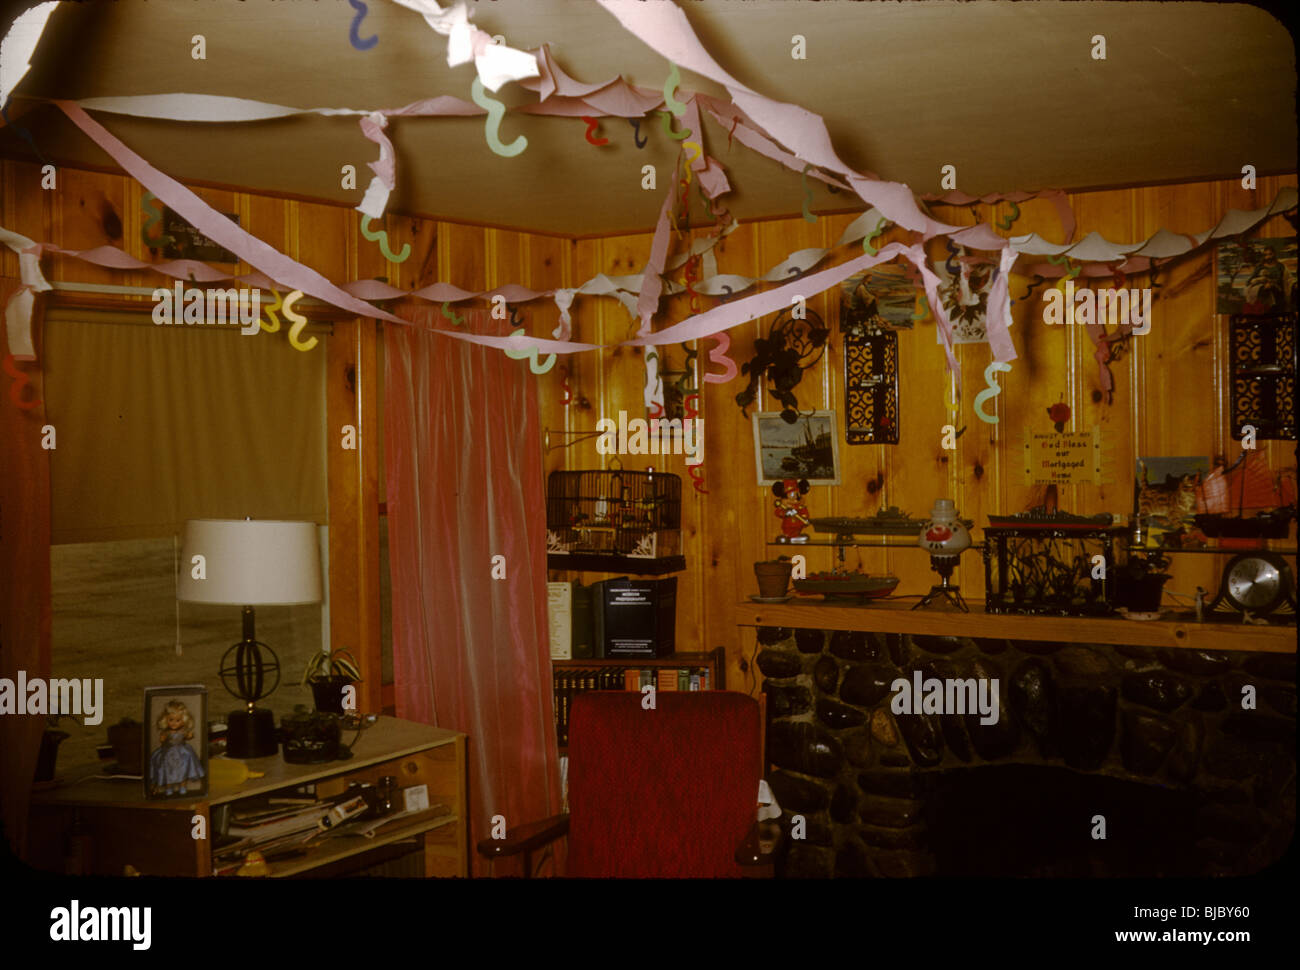 A room inside a house with wood panel walls is decorated for a New Years party during the late 1950s. celebration ribbons Stock Photo